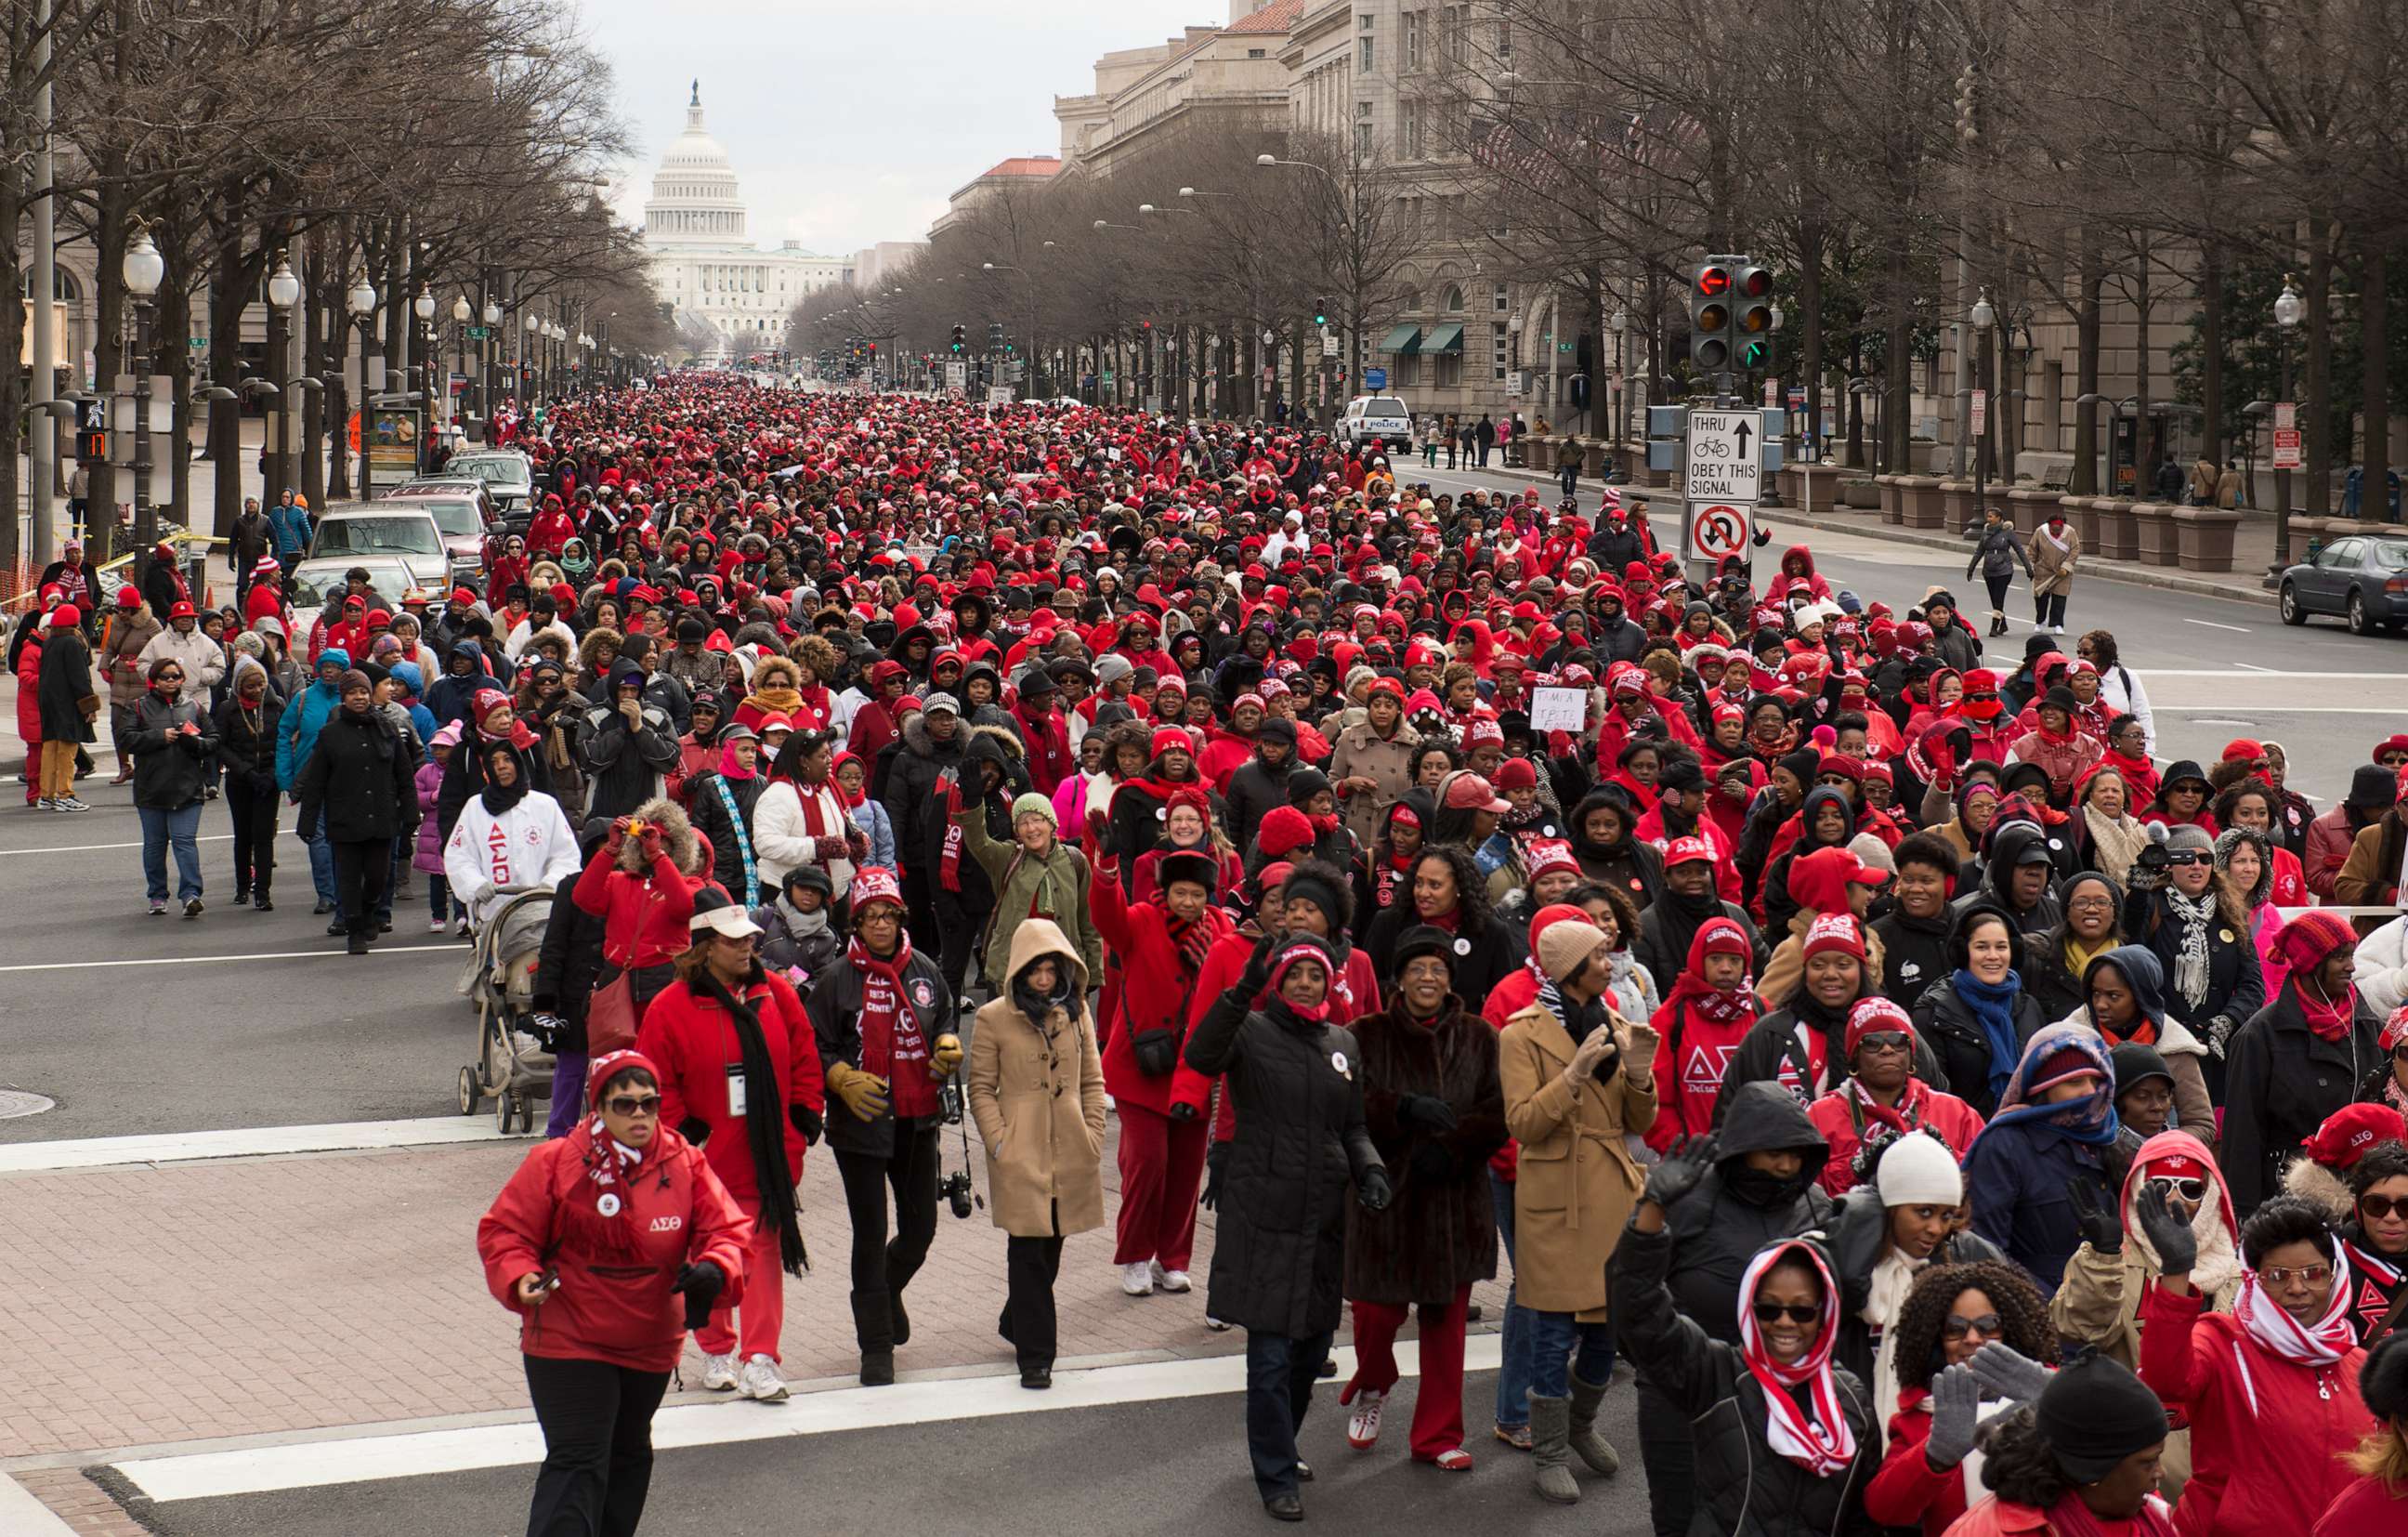 PHOTO: In this March 3, 2013 file photo Thousands of members of Delta Sigma Theta Sorority, retrace the footsteps of their founders in Washington, D.C.